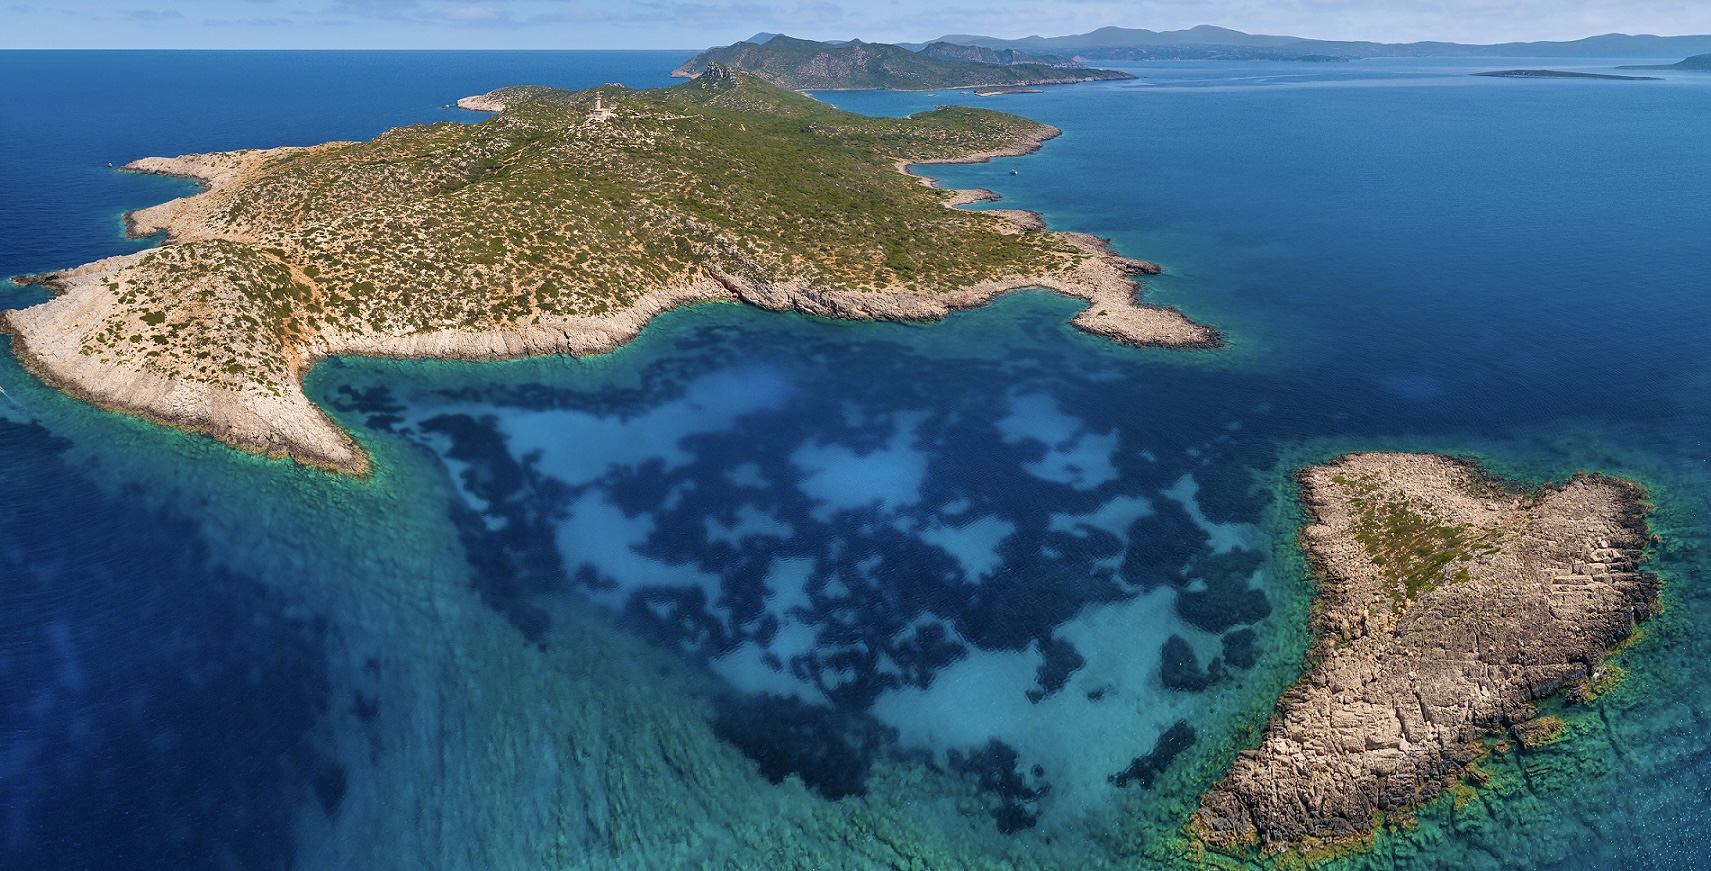 Greece,,Peloponnese:,Aerial,View,Of,The,South,Coast,Of,The